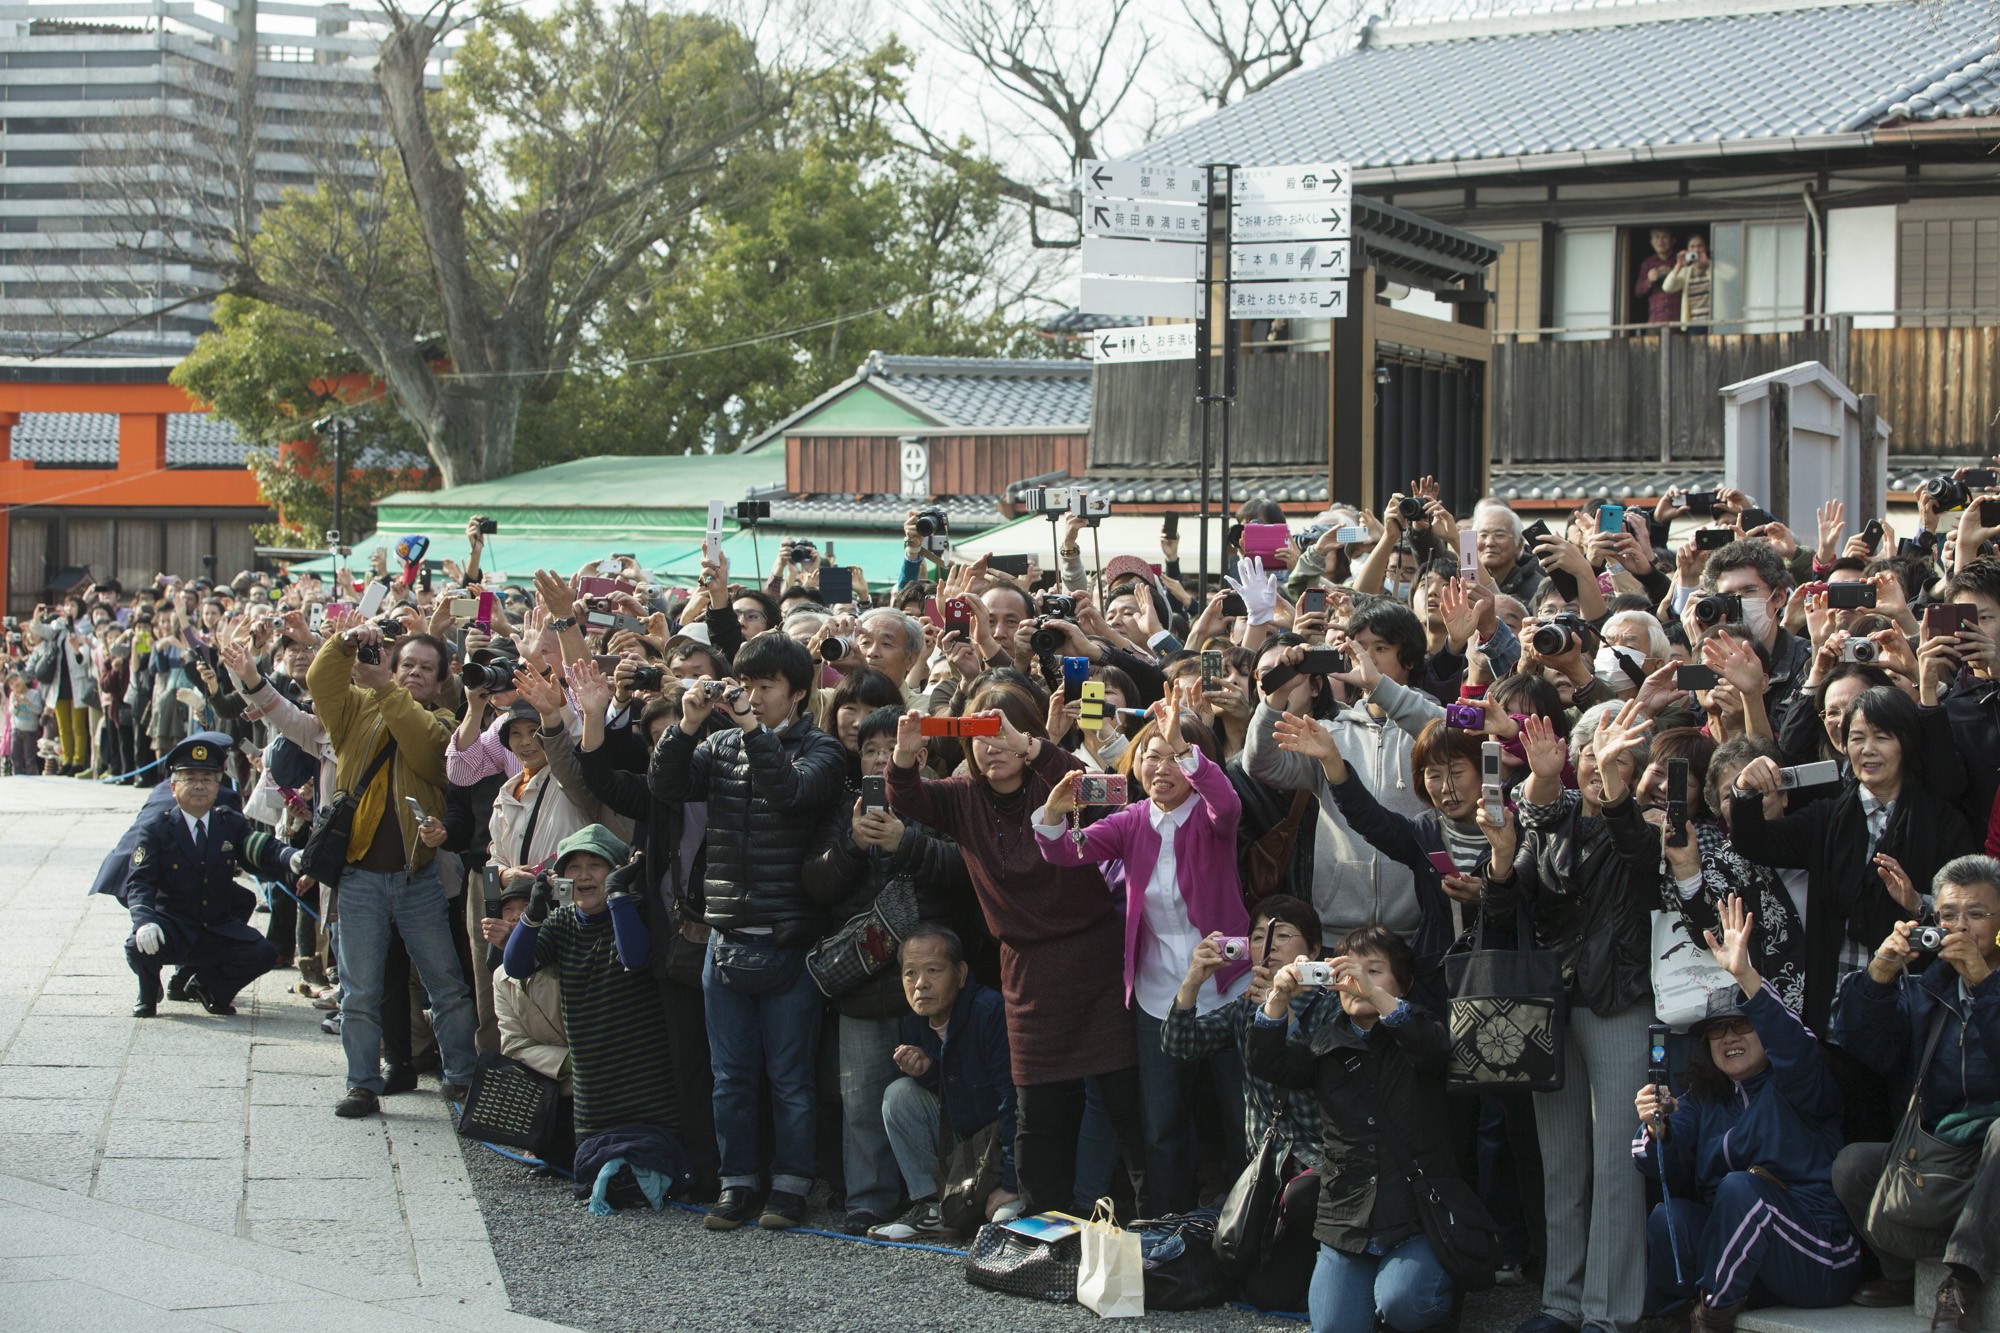 The Crowd Waves as First Lady Michelle Obama Departs the Fushimi Inari Shinto Shrine in Kyoto